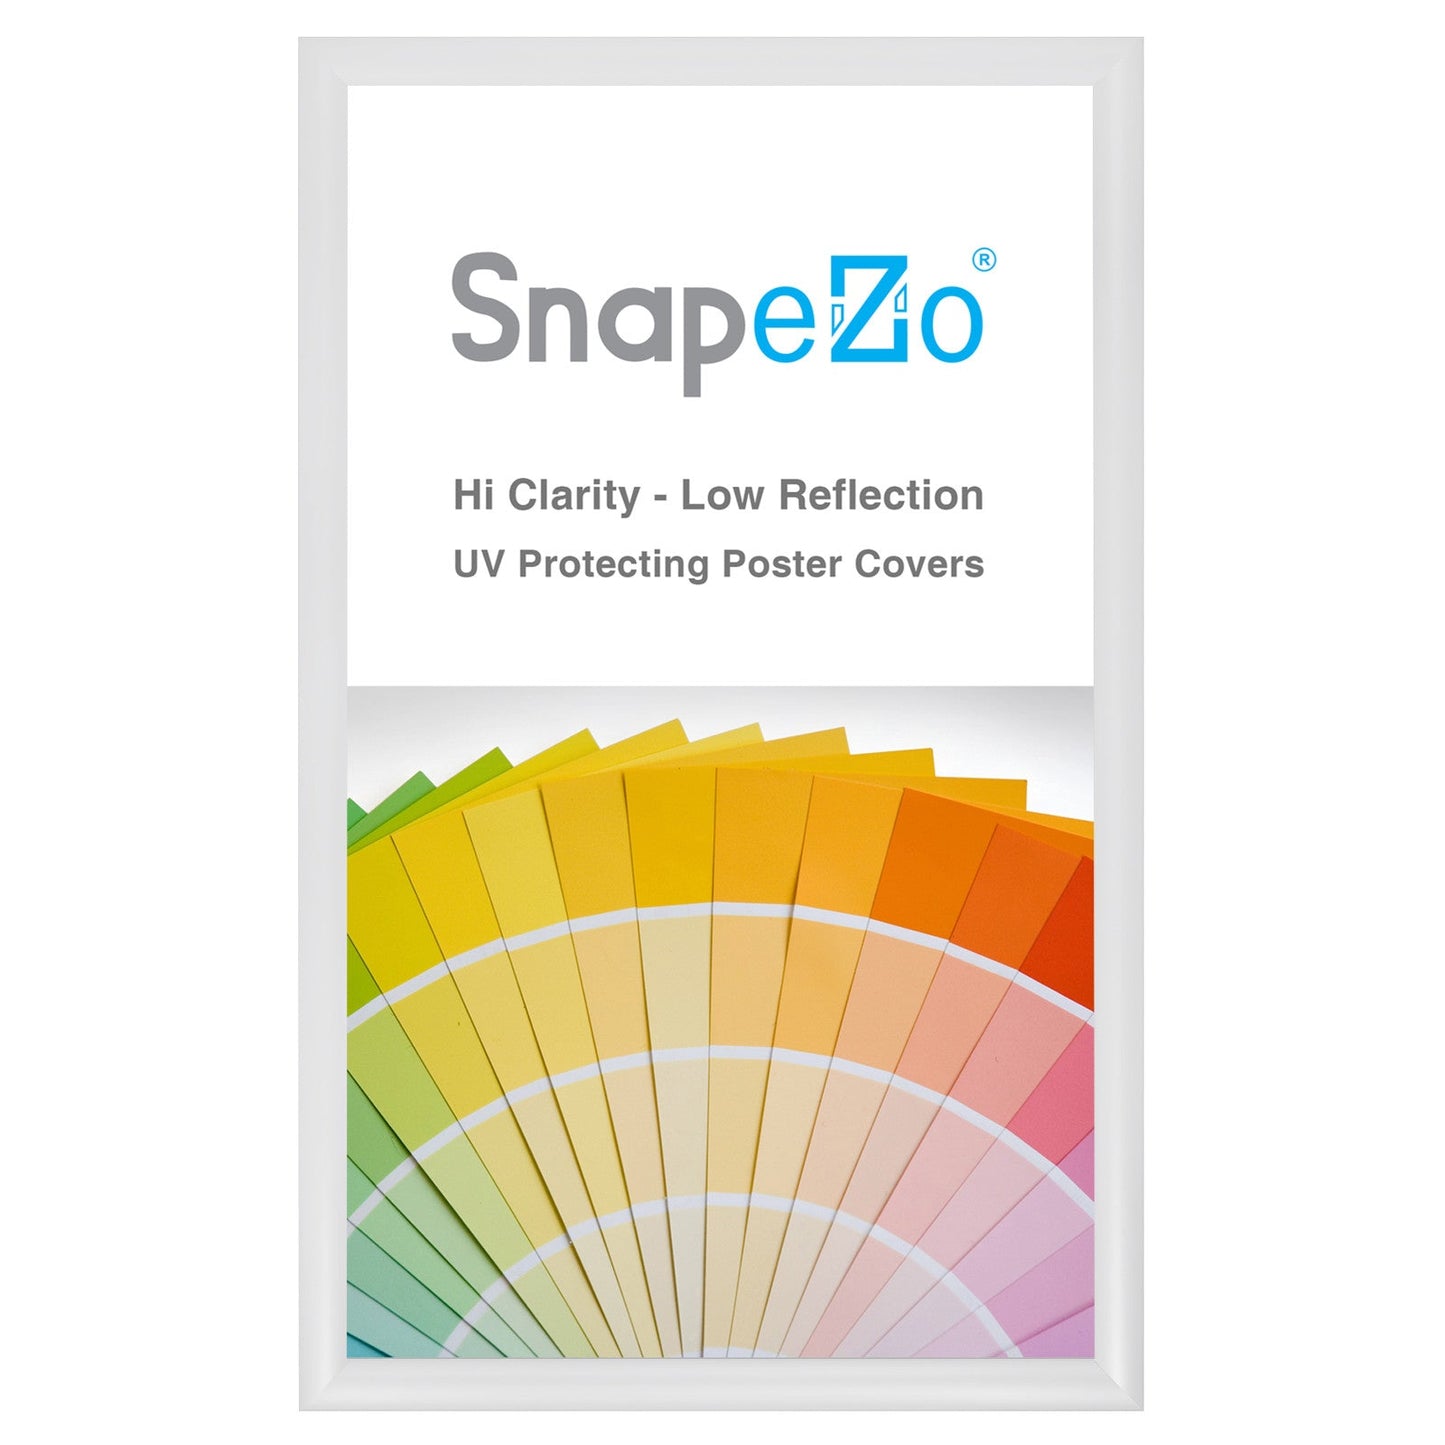 Load image into Gallery viewer, 12x20 White SnapeZo® Snap Frame - 1.2&amp;quot; Profile
